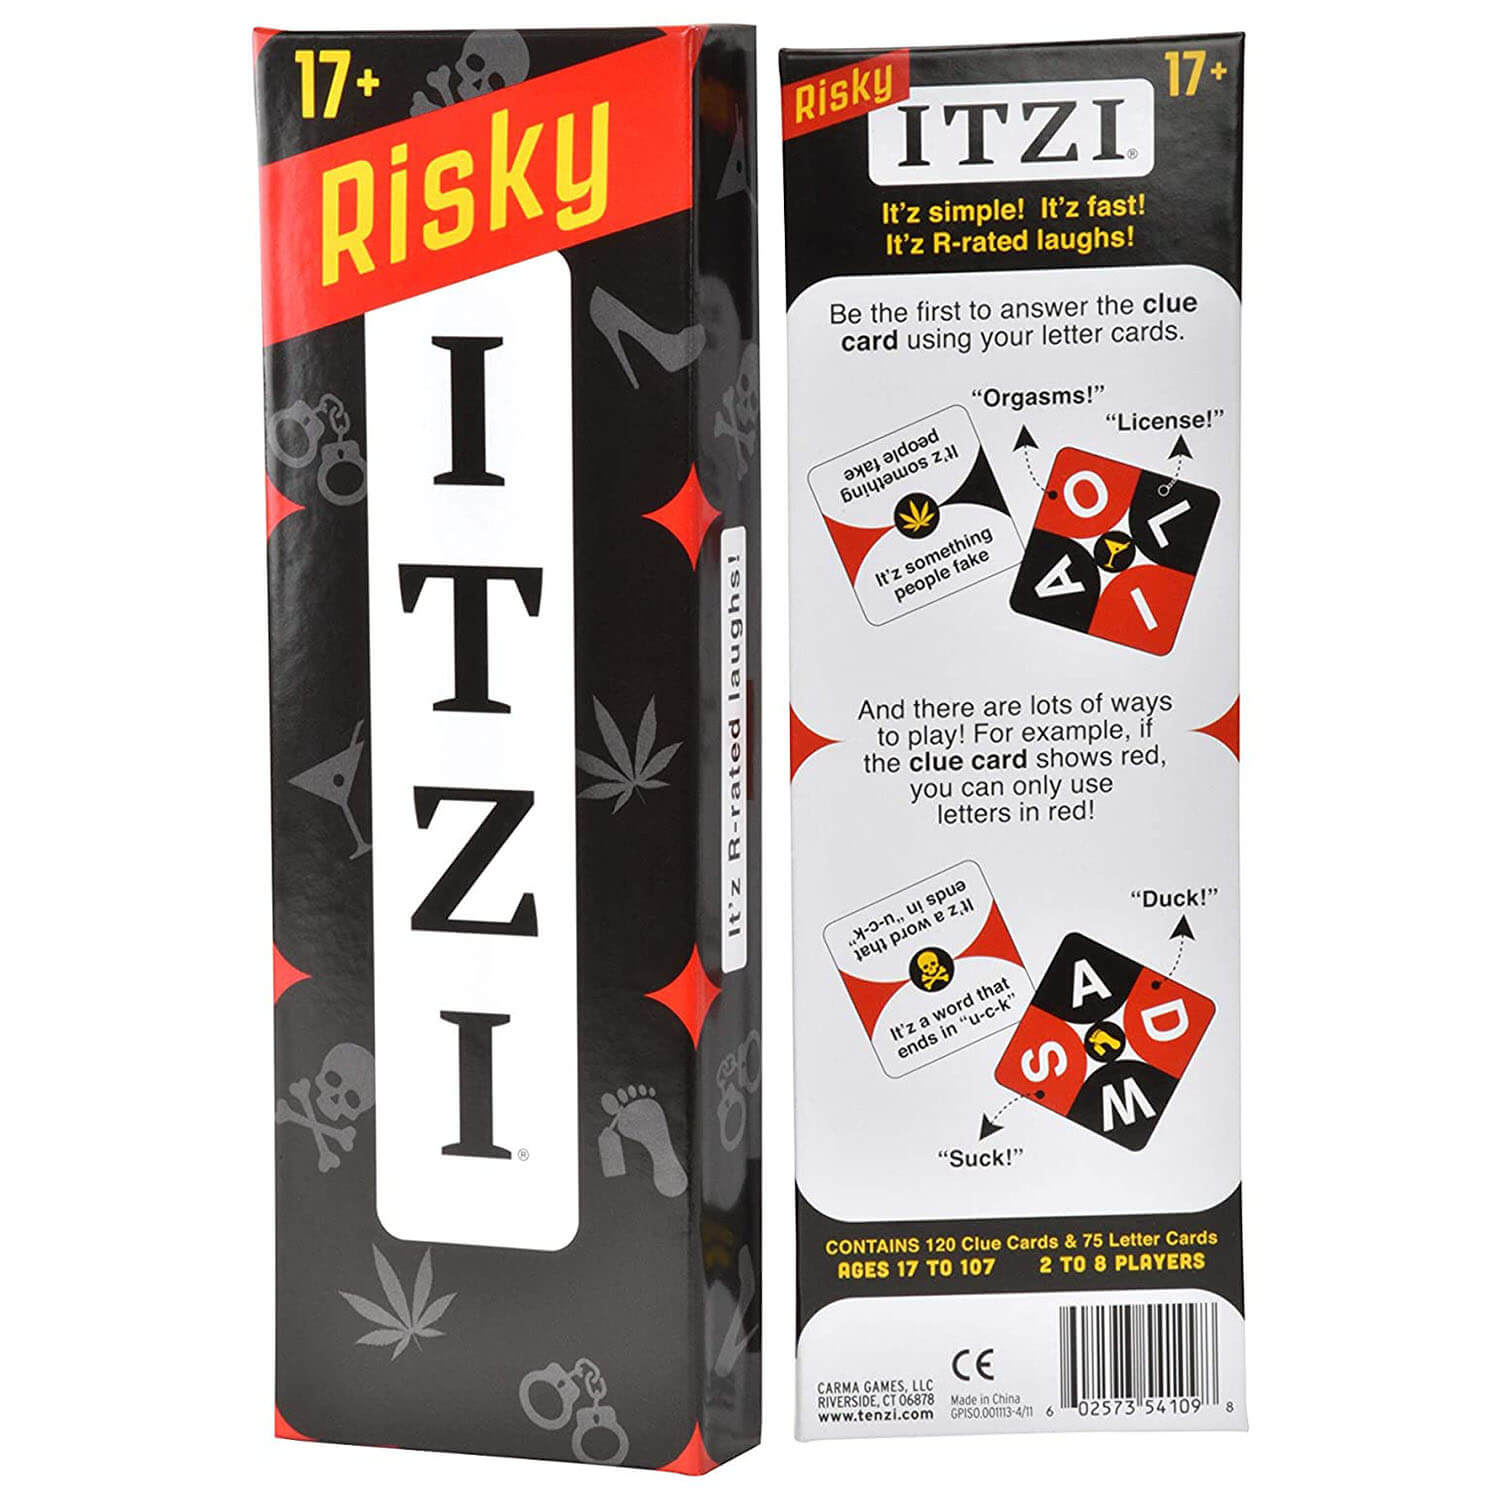 Open view of the Risky ITZI Game.